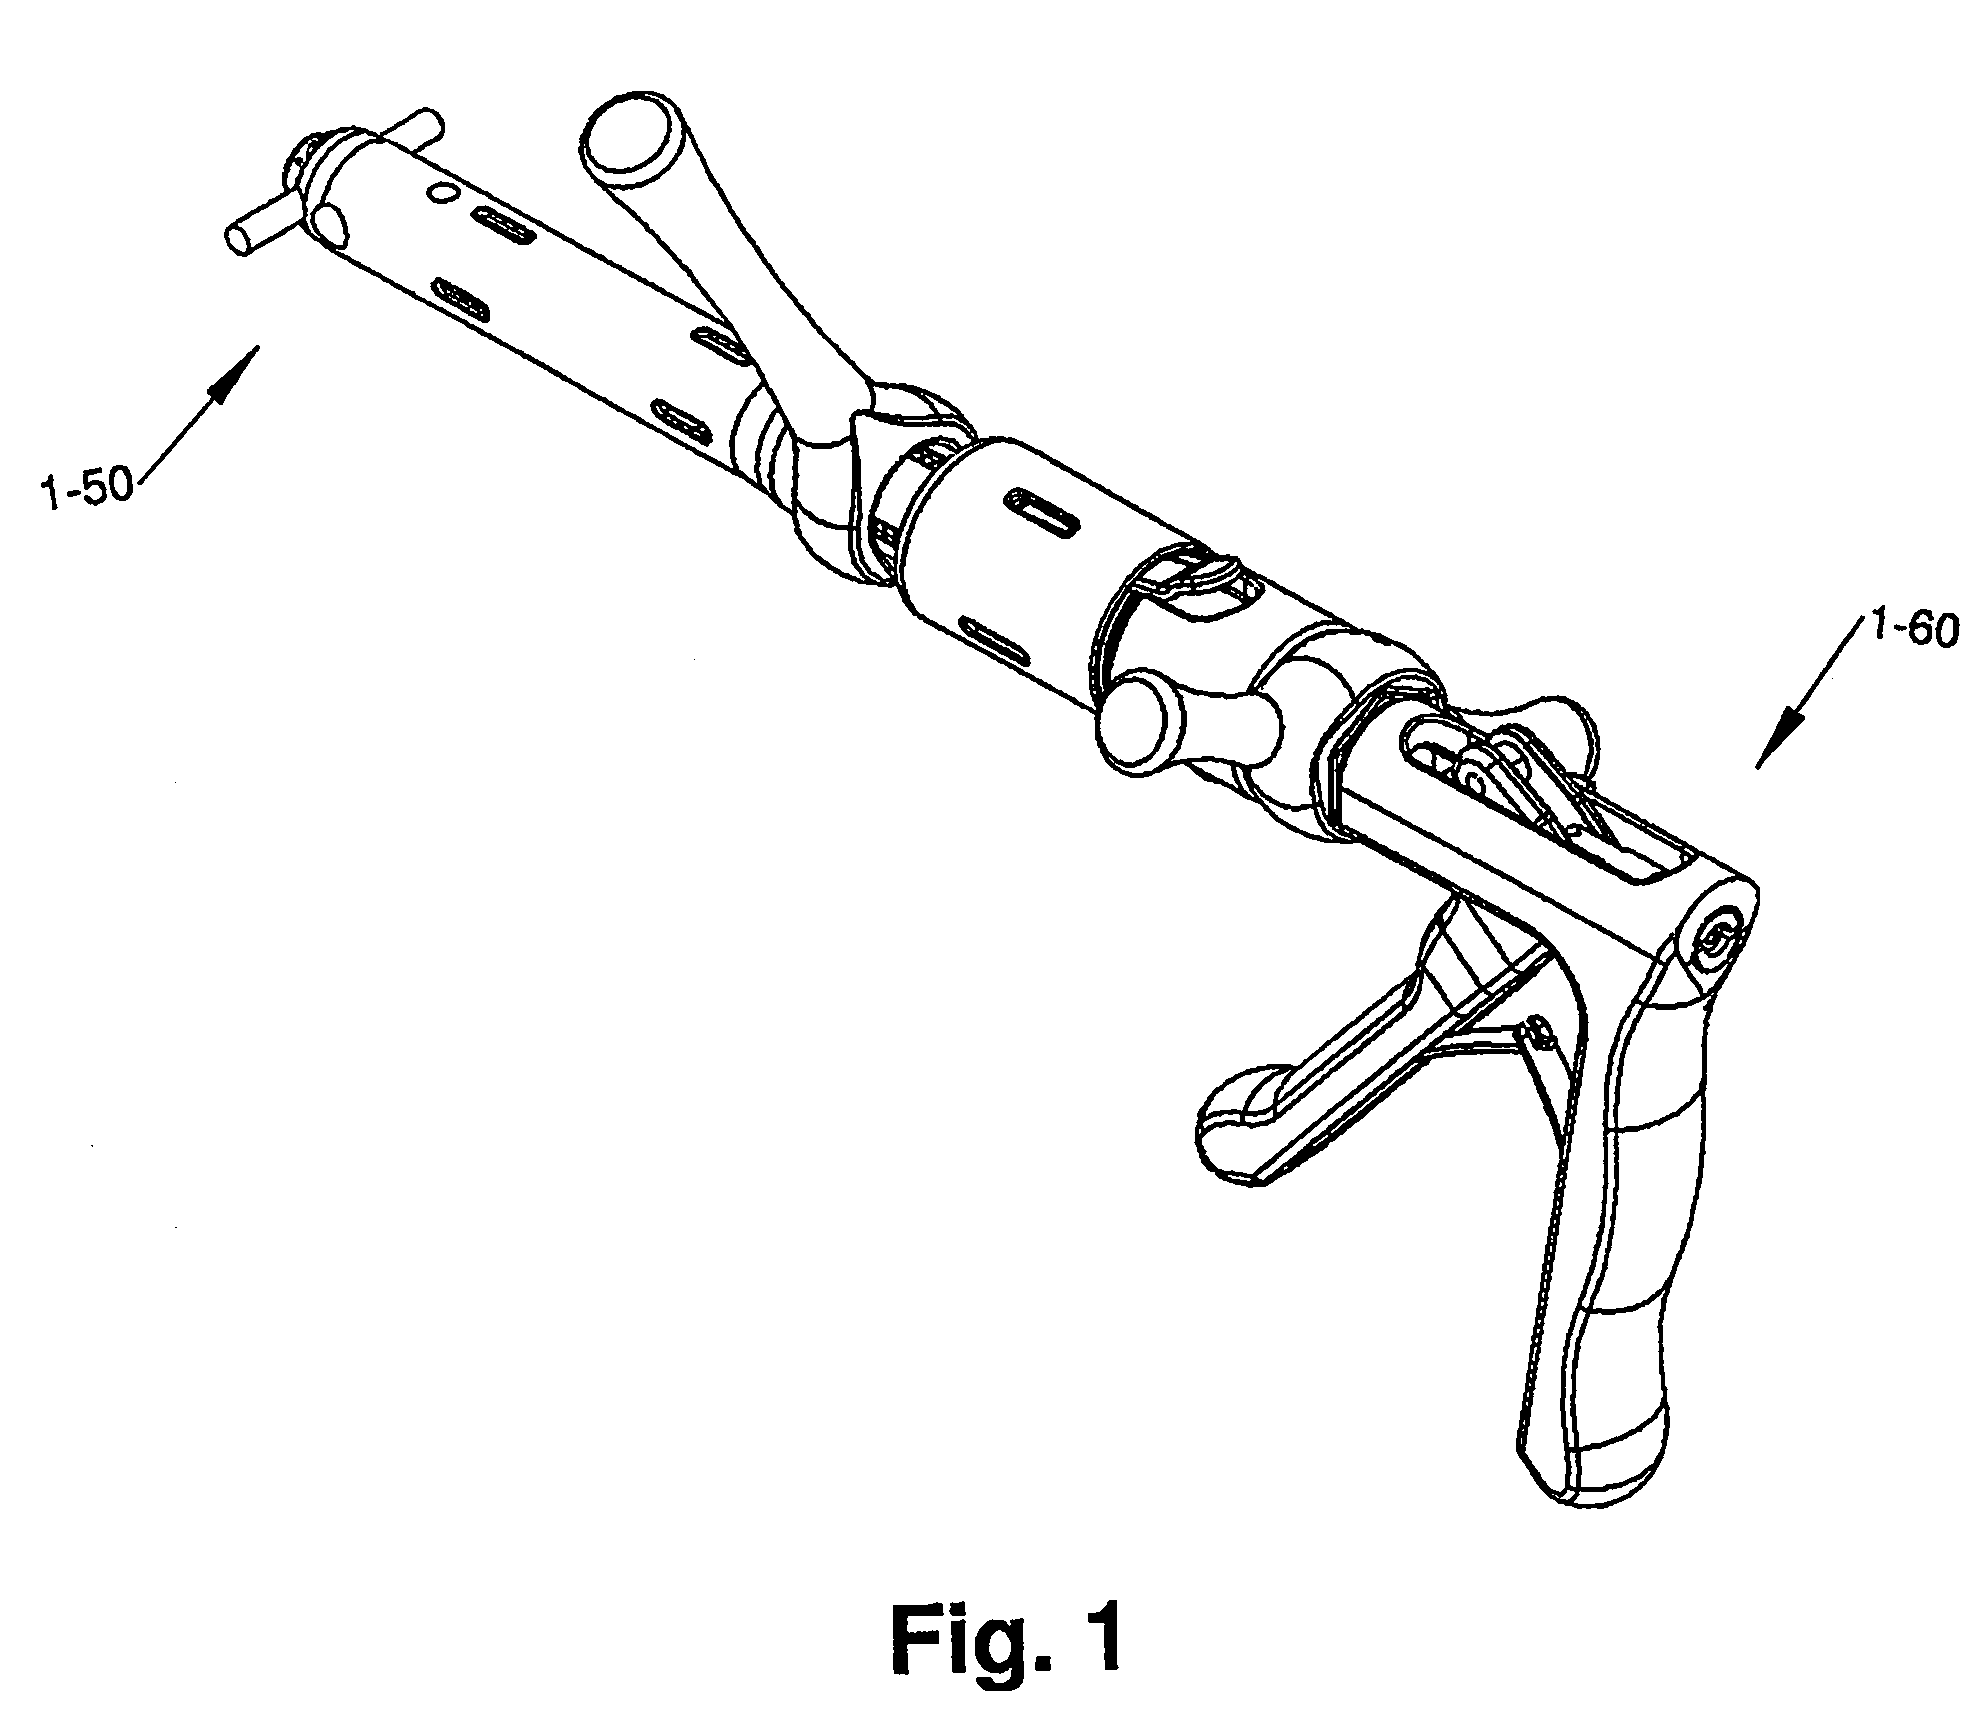 Spinal rod reducer and cap insertion apparatus